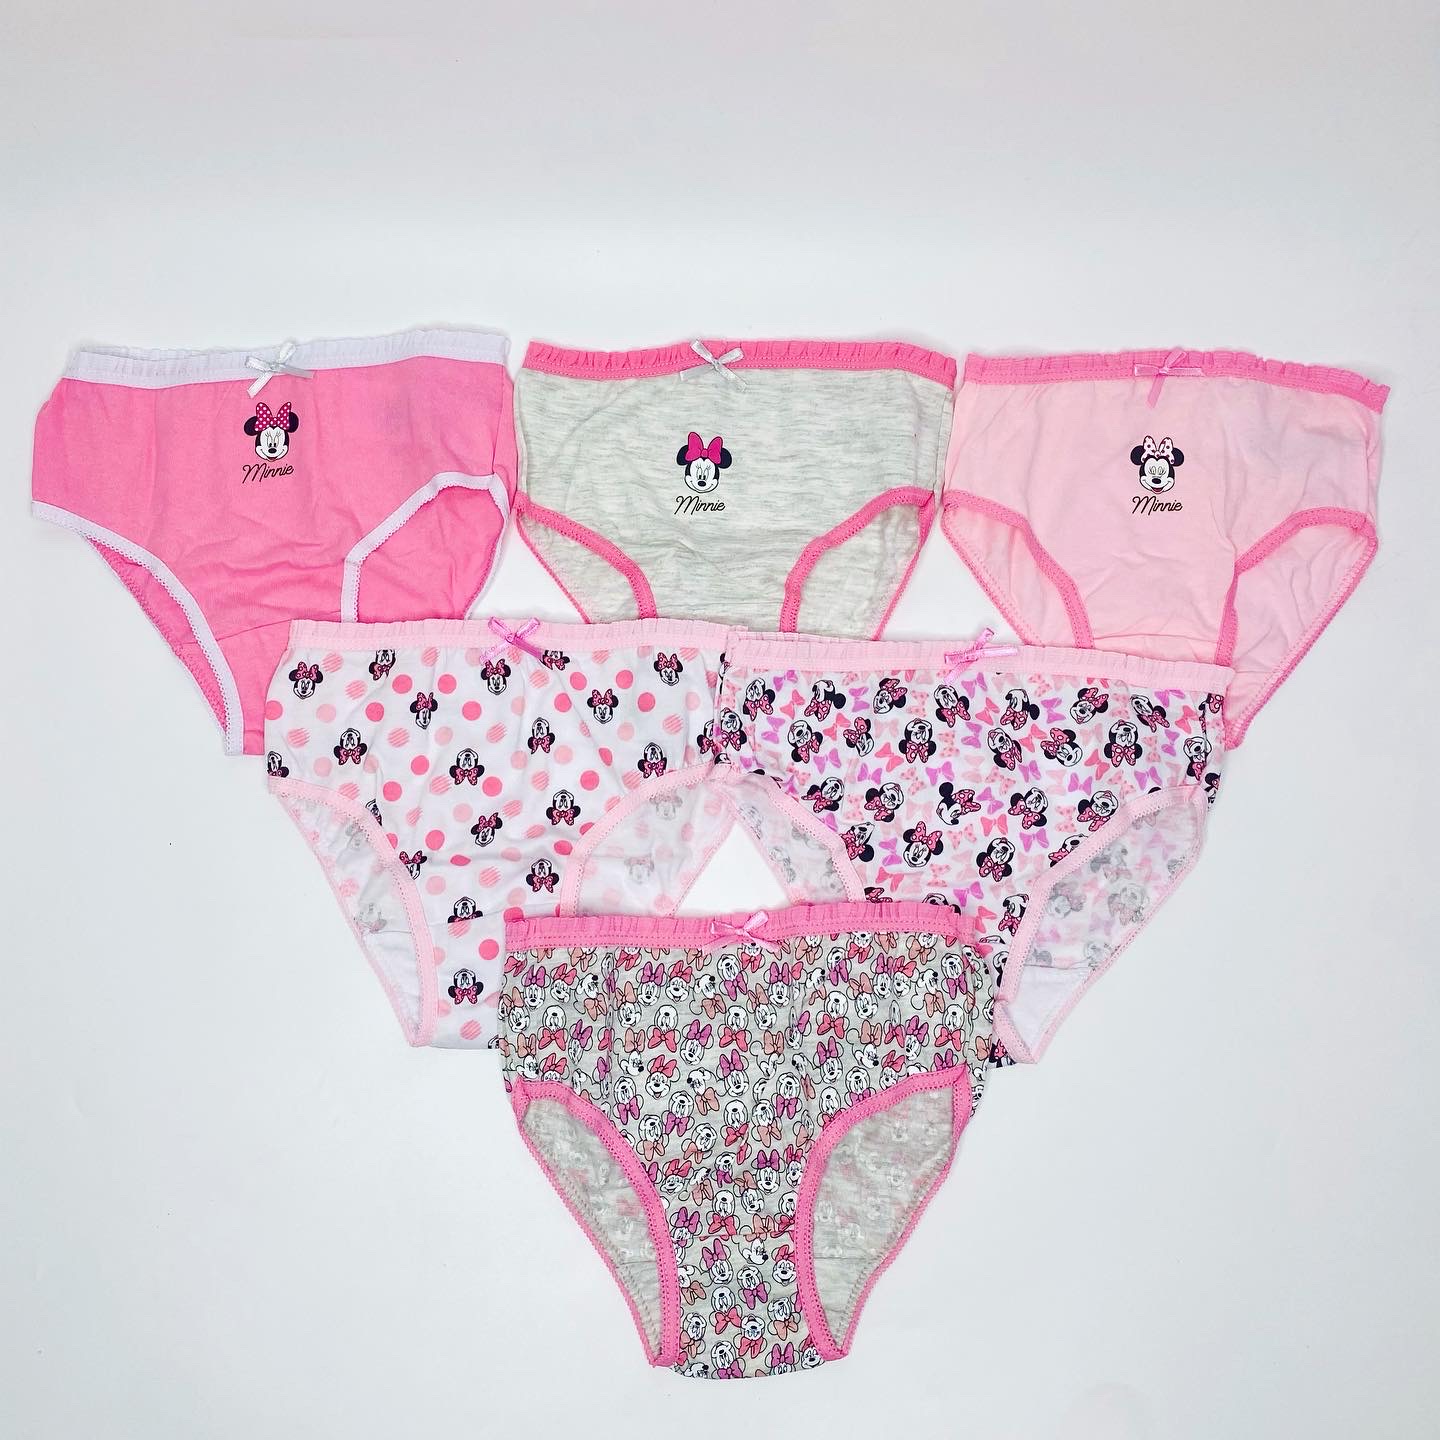 Littletown Primark Toddler Girls Minnie Mouse Hipster Panties, 6